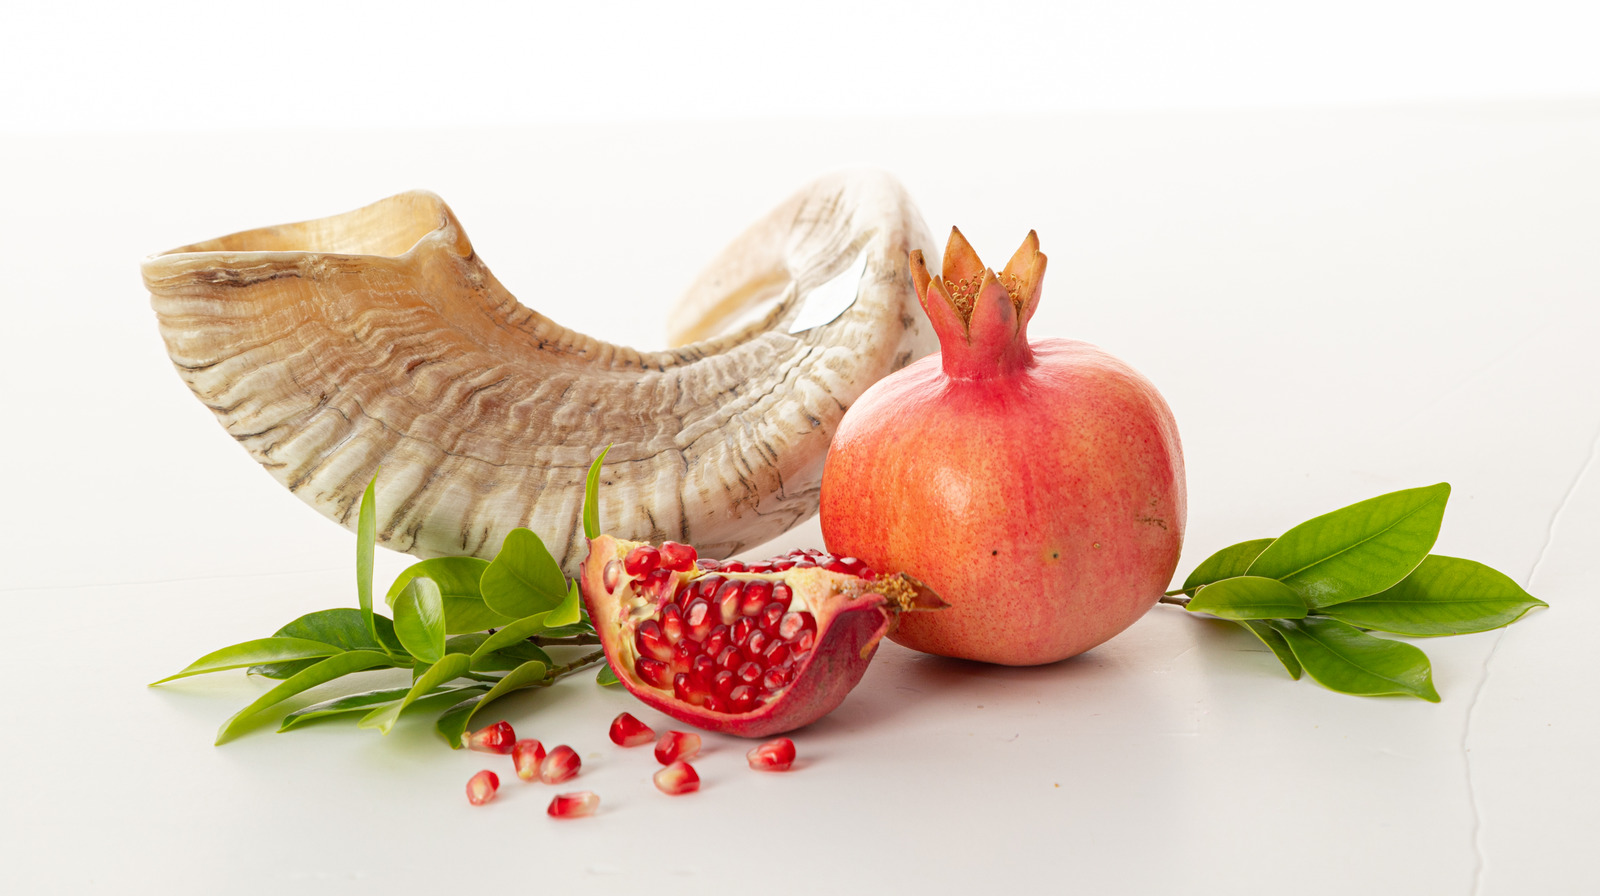 Why Pomegranate Is A Symbolic Food For Rosh Hashanah